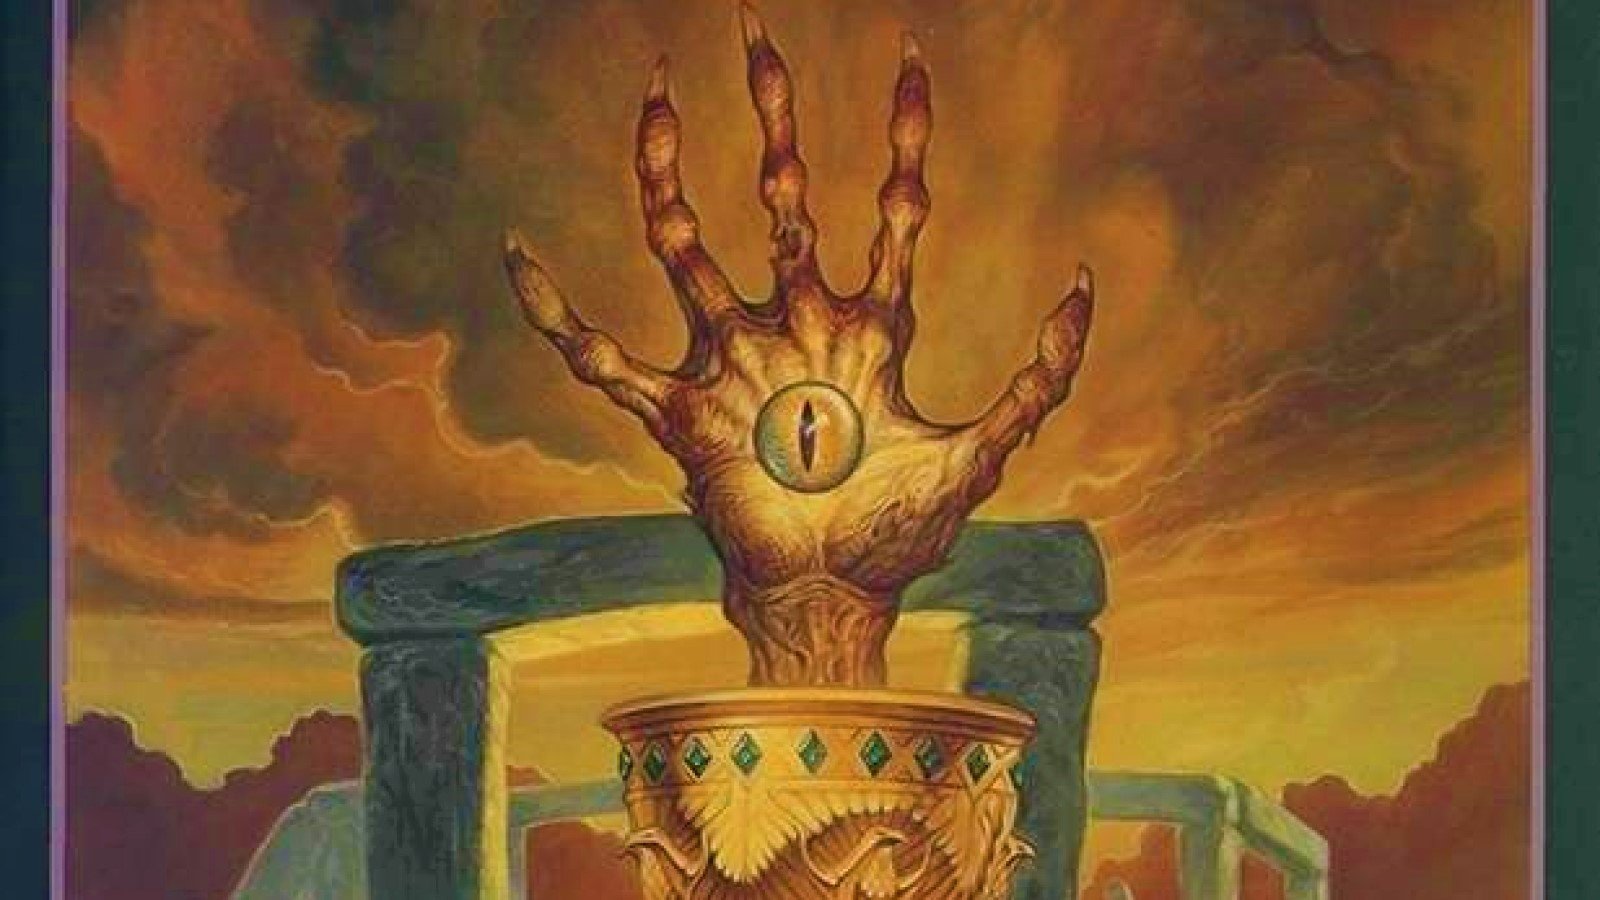 DnD Vecna - a hand with an eyeball in the palm extends from a golden goblet